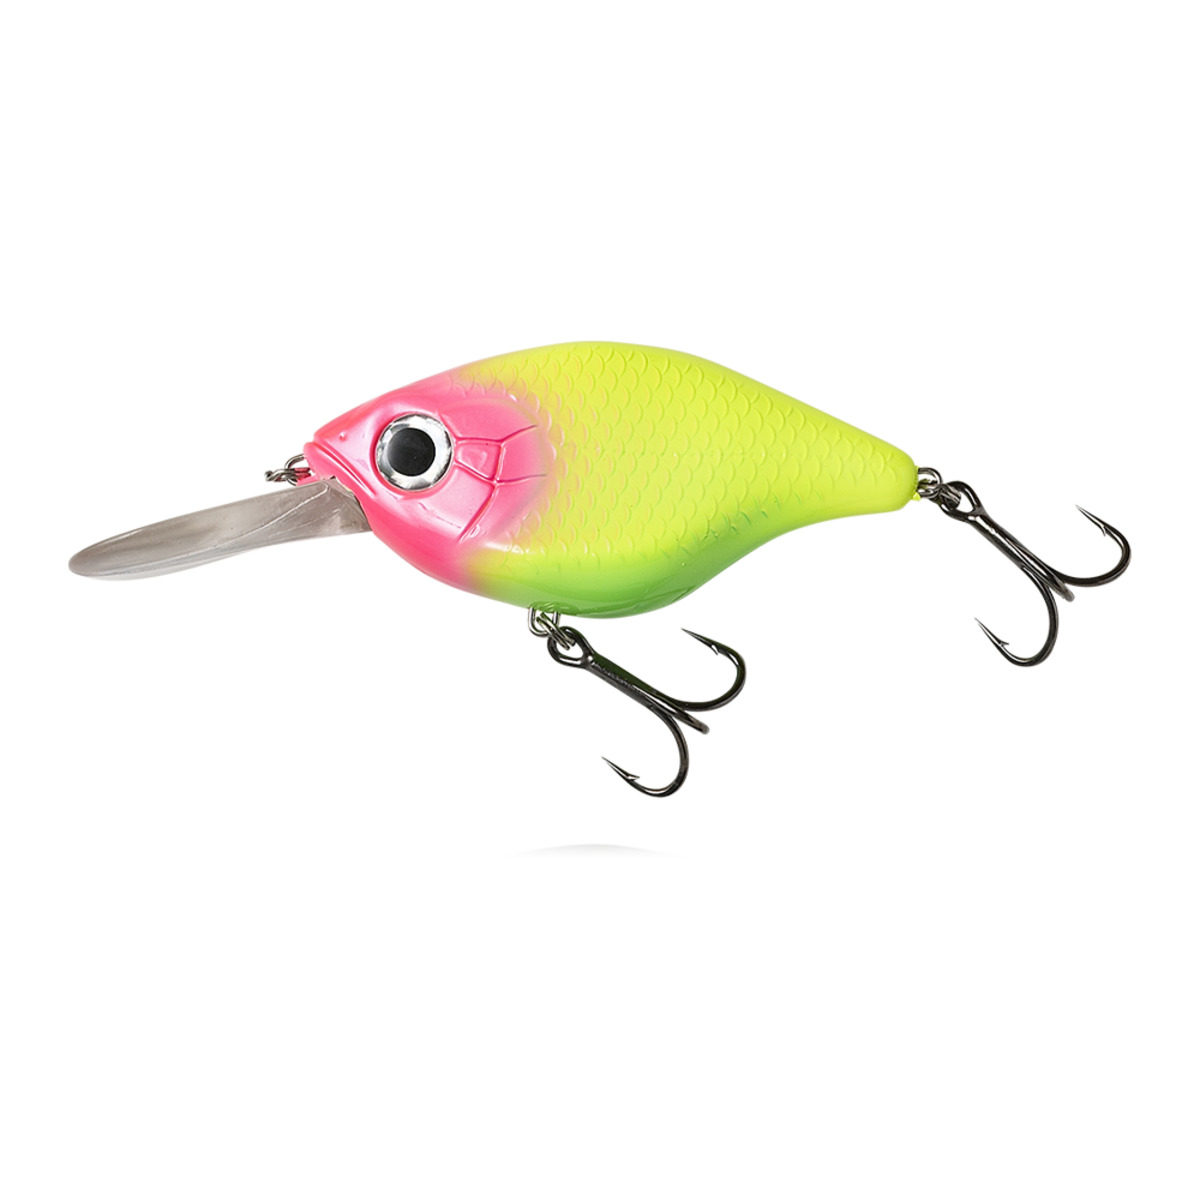 Madcat Tight-s Deep 16cm 70g Floating - CANDY